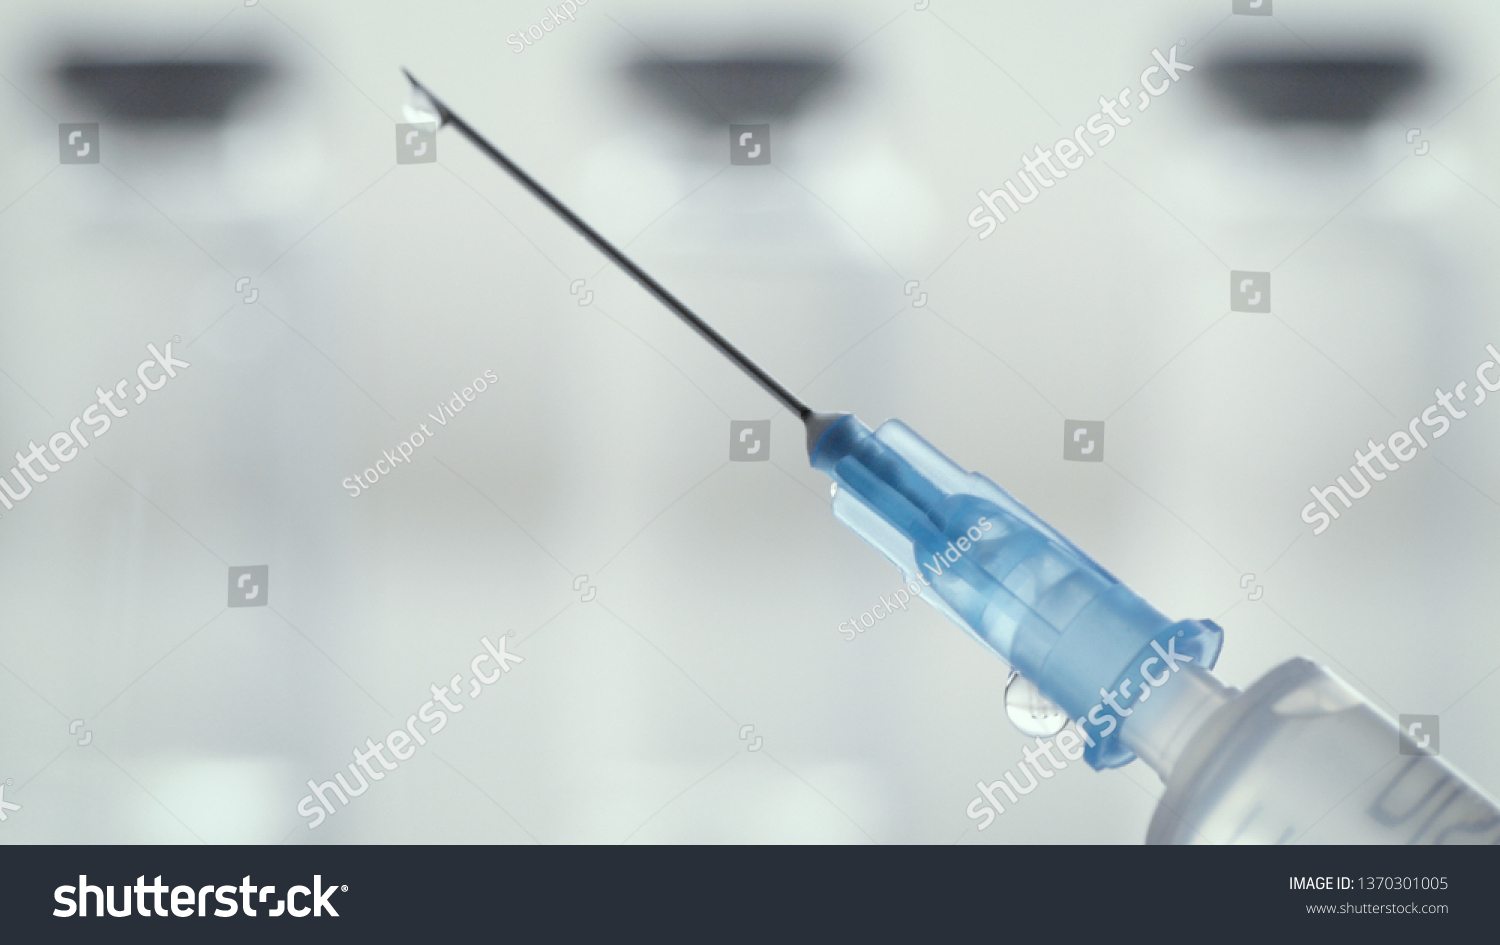 Measles vaccine shooting from a plastic syringe. Mandatory vaccinations are currently a hotly debated topic with the anti-vaxx movement believing vaccines cause autism. #1370301005